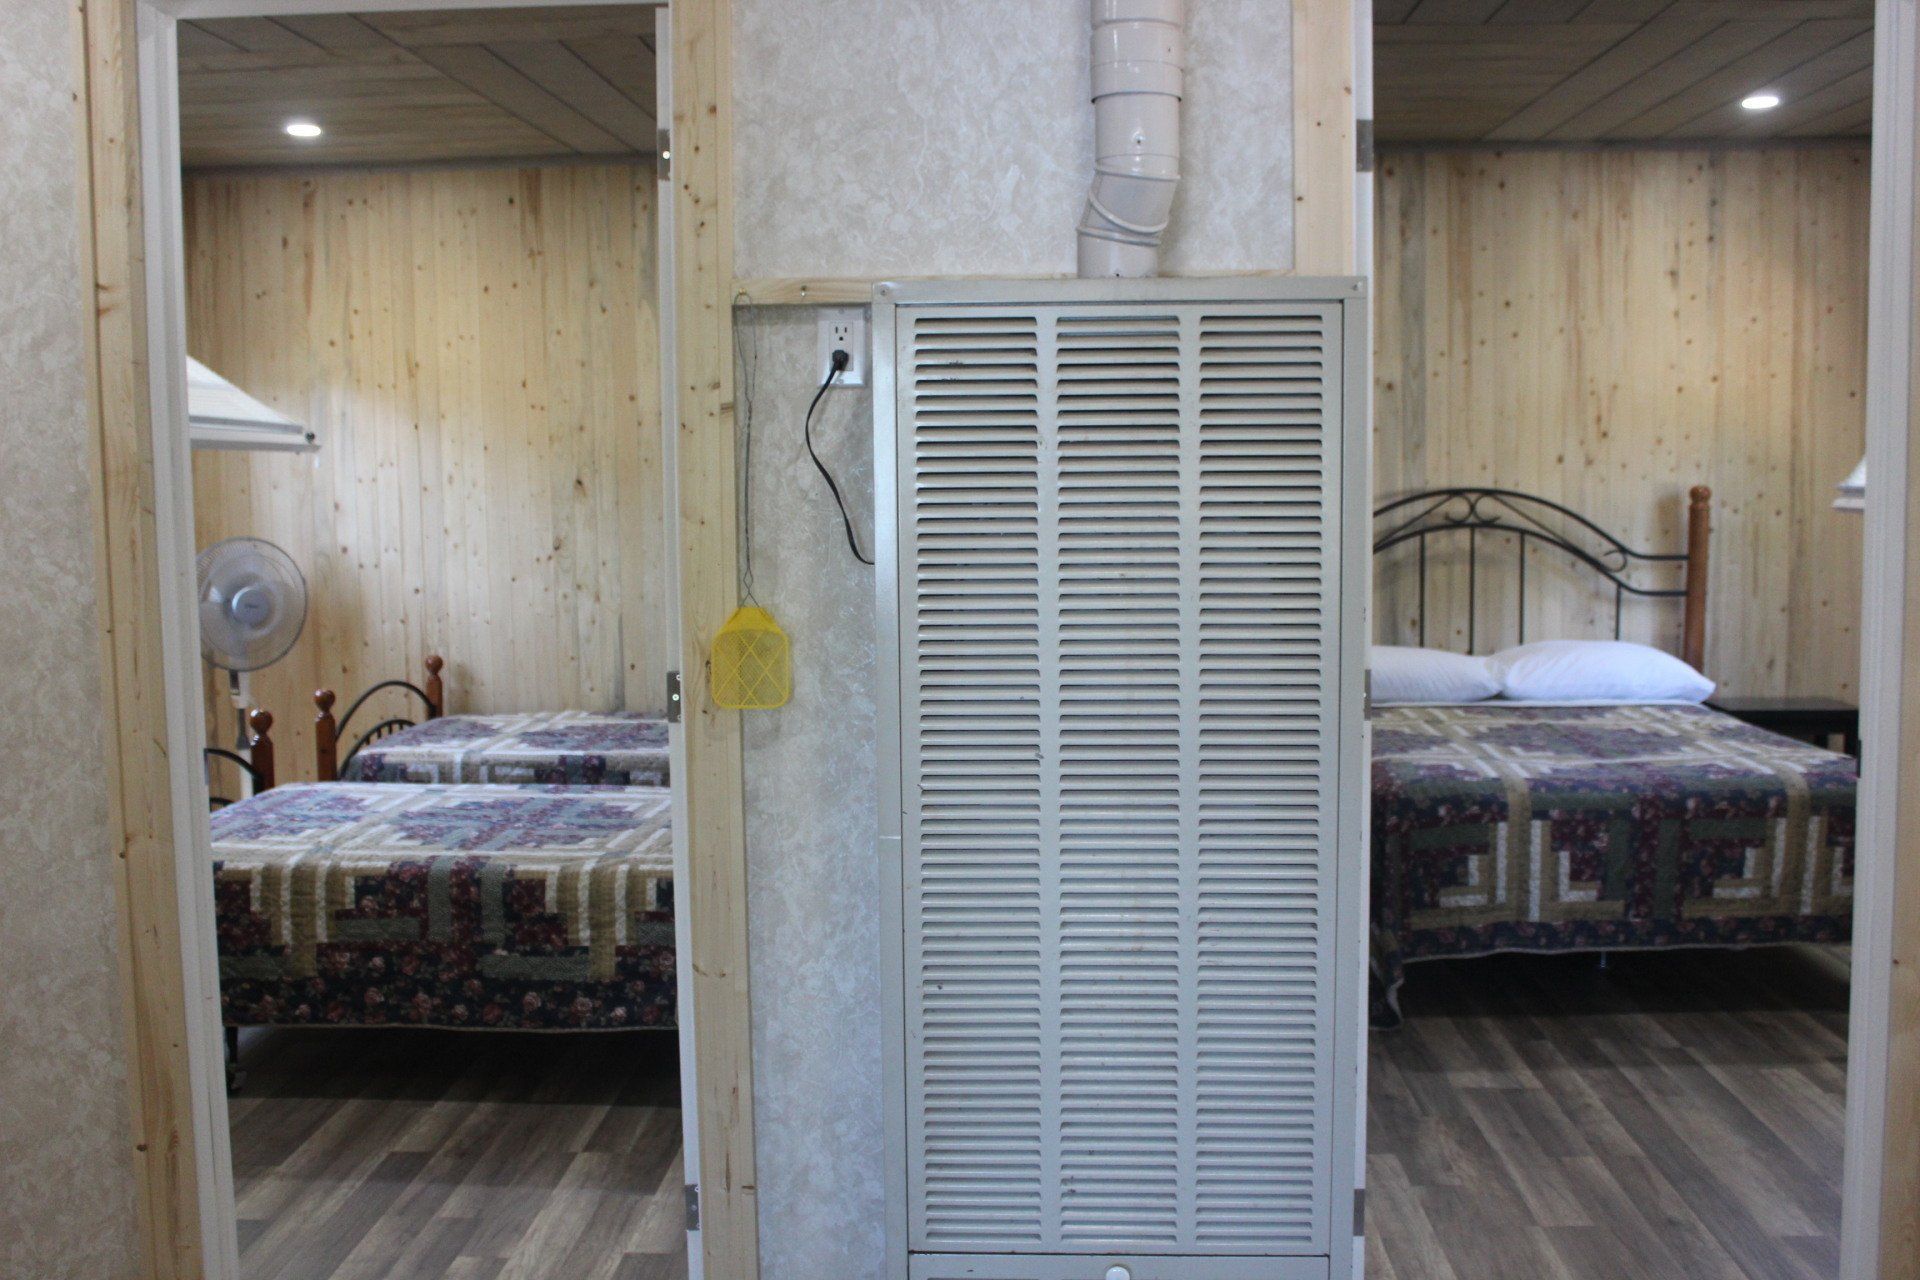 A bedroom with two beds , a closet and a fan.